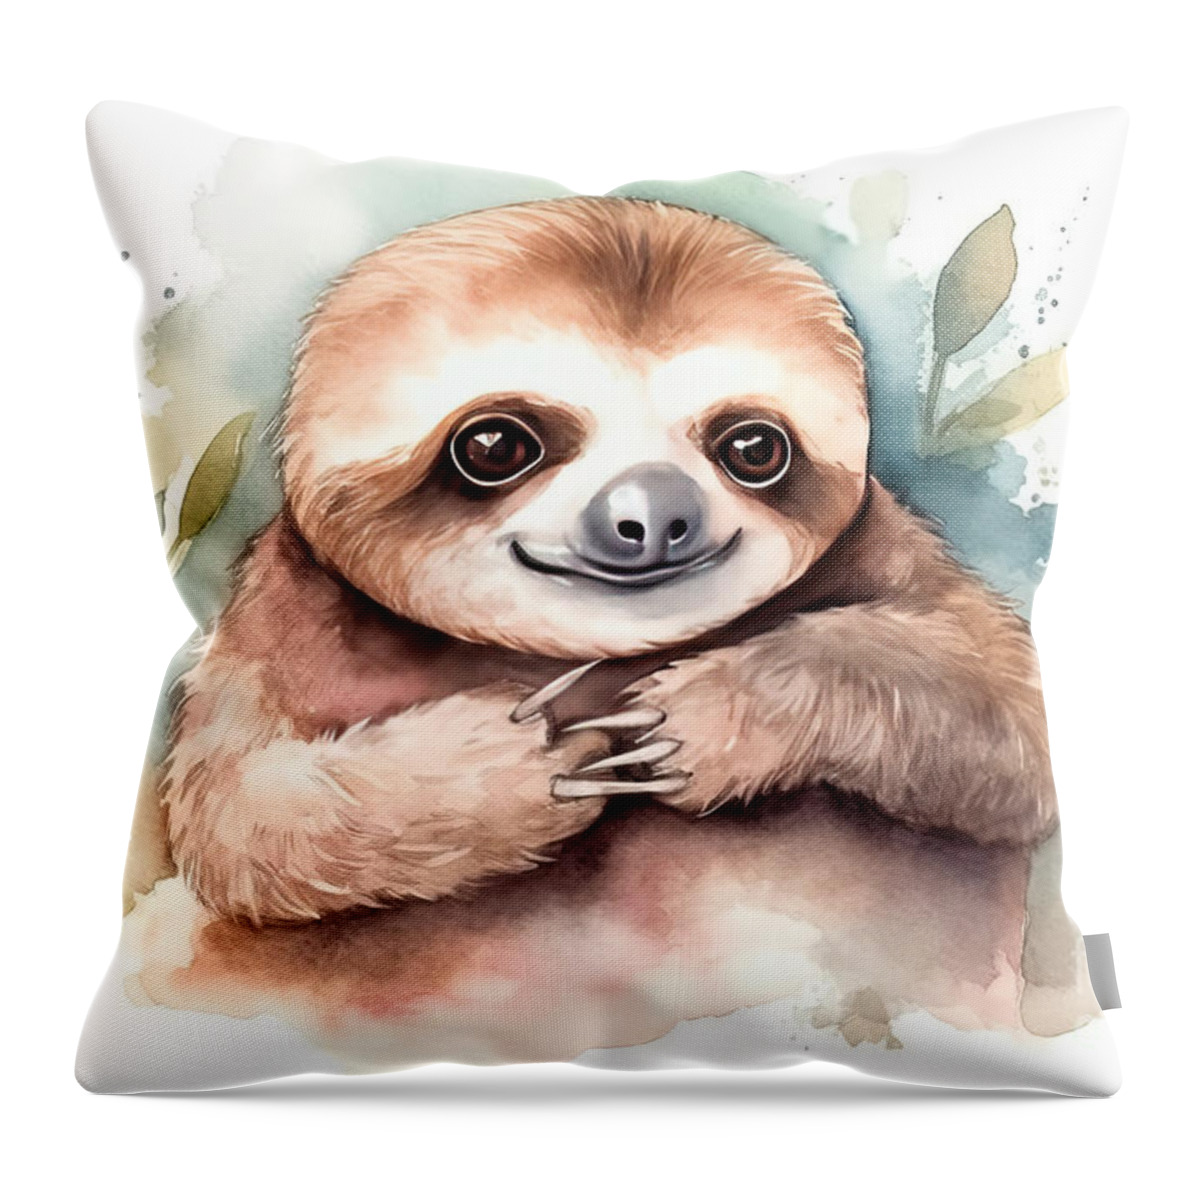 Cute Throw Pillow featuring the painting Illustration of watercolor cute baby sloth, by N Akkash